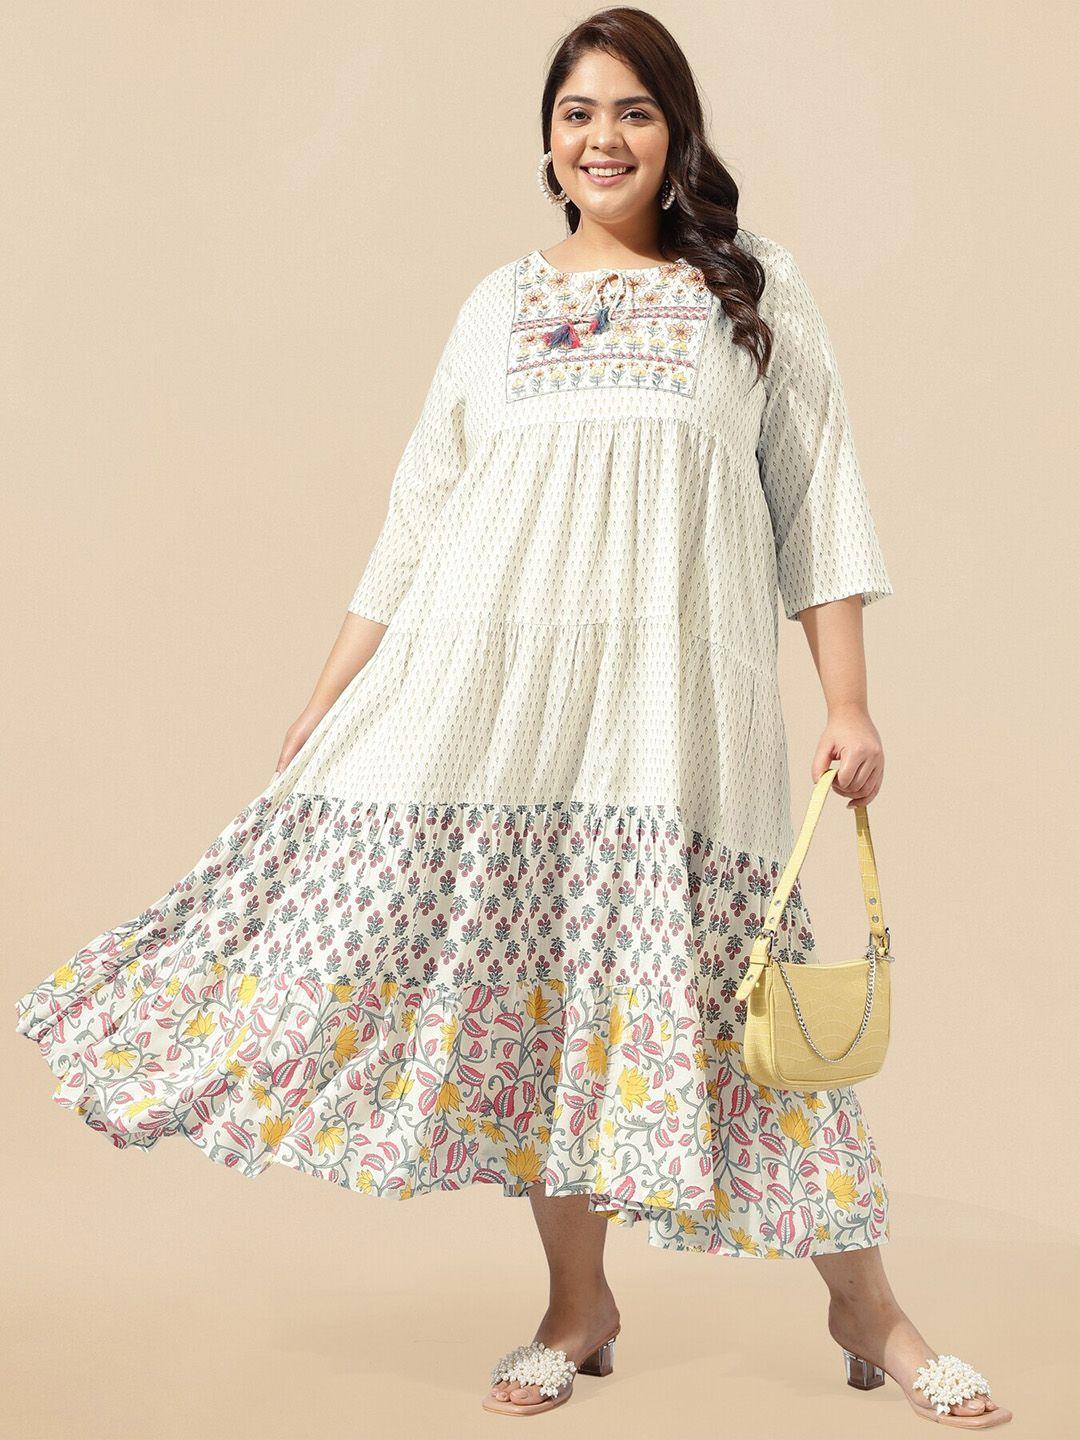 mirchi fashion white plus size floral printed neck embroidered tiered empire ethnic dress